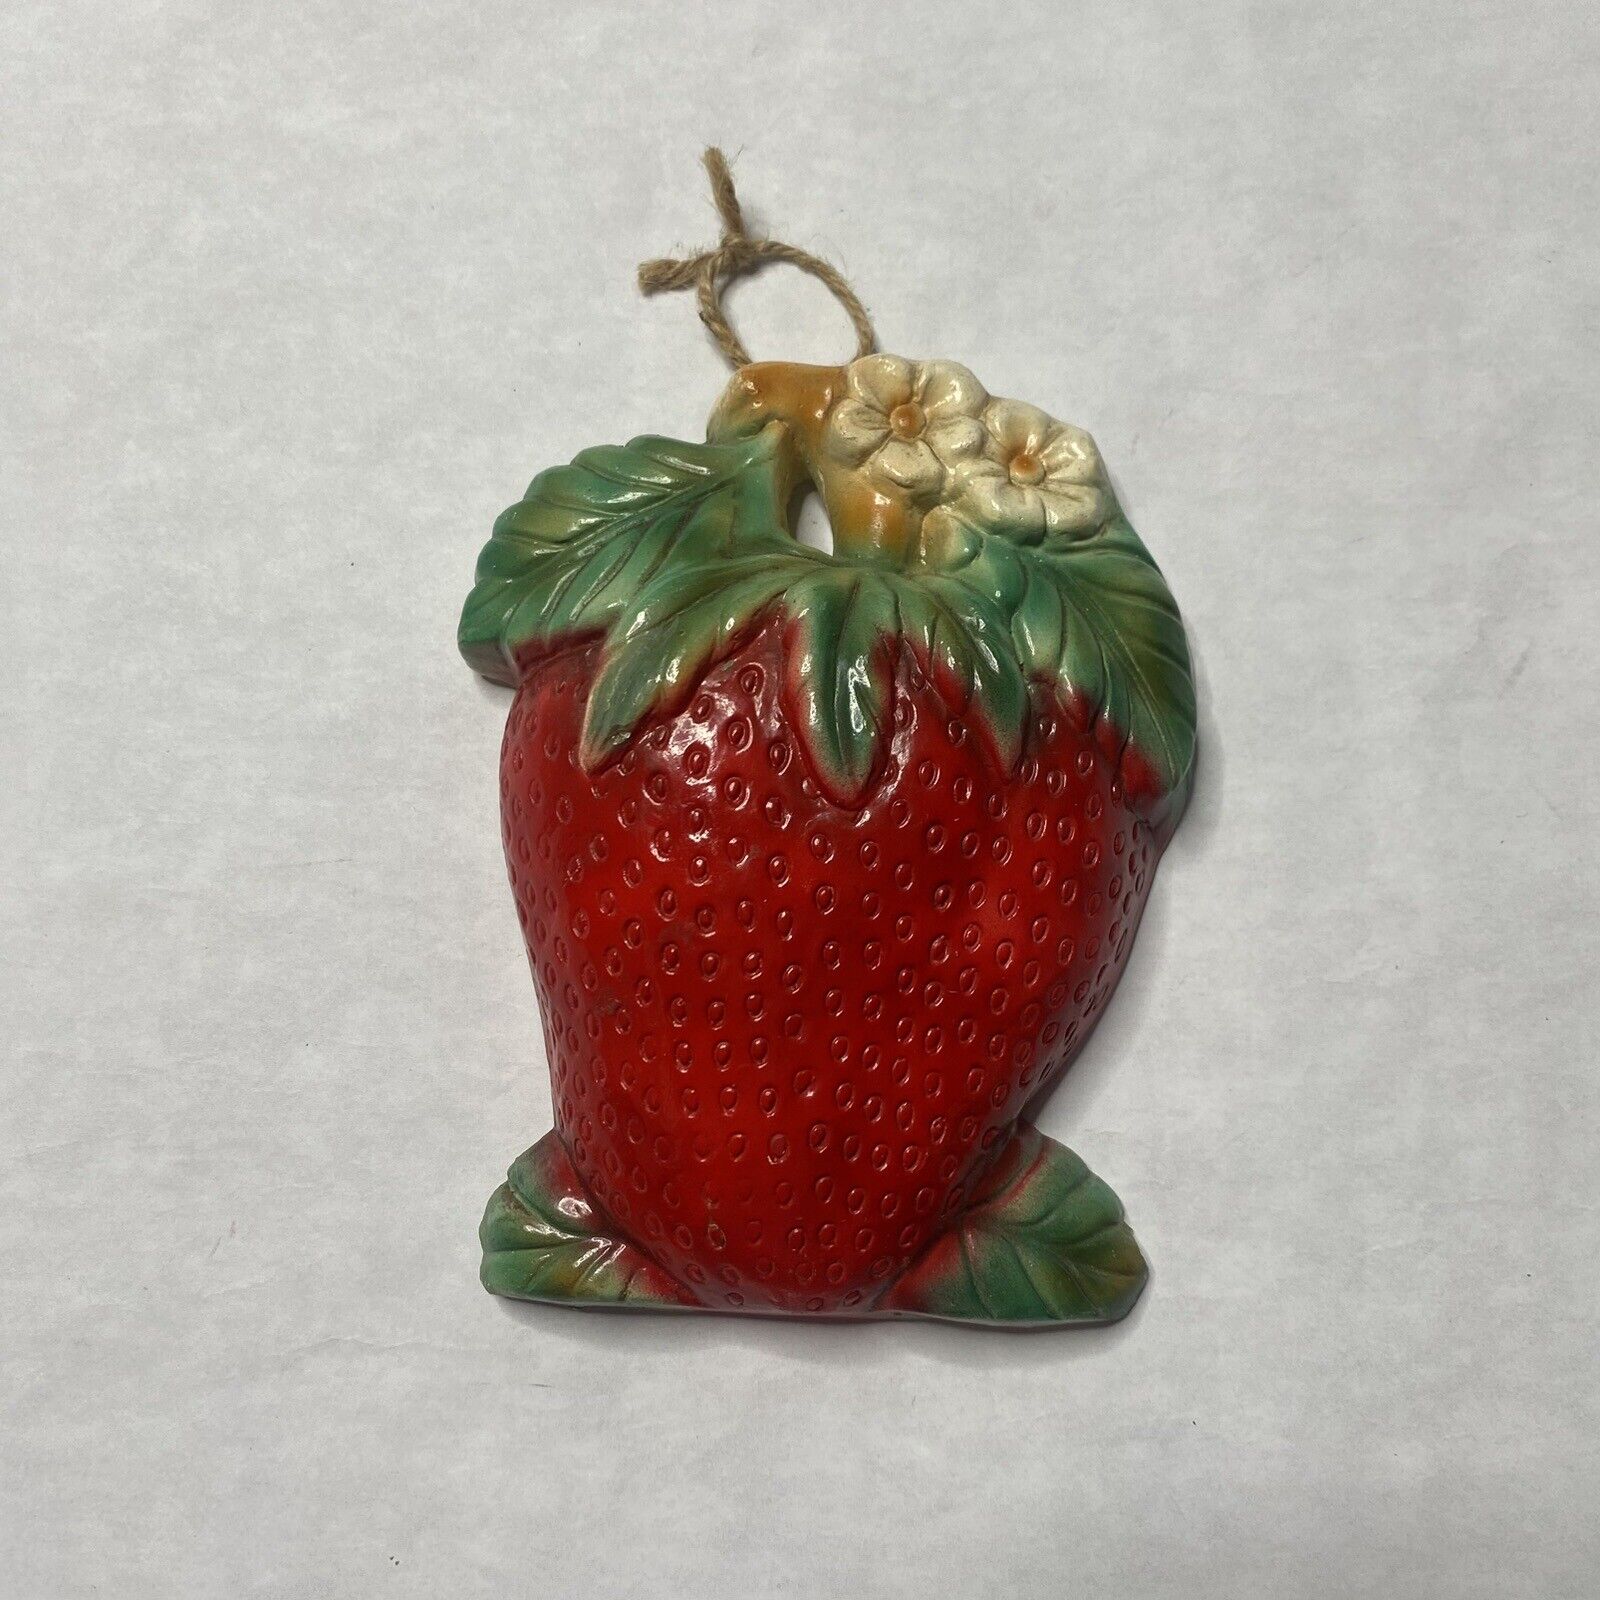 Vintage Chalkware Strawberry Fruit Flower Hanging Home Wall Decor